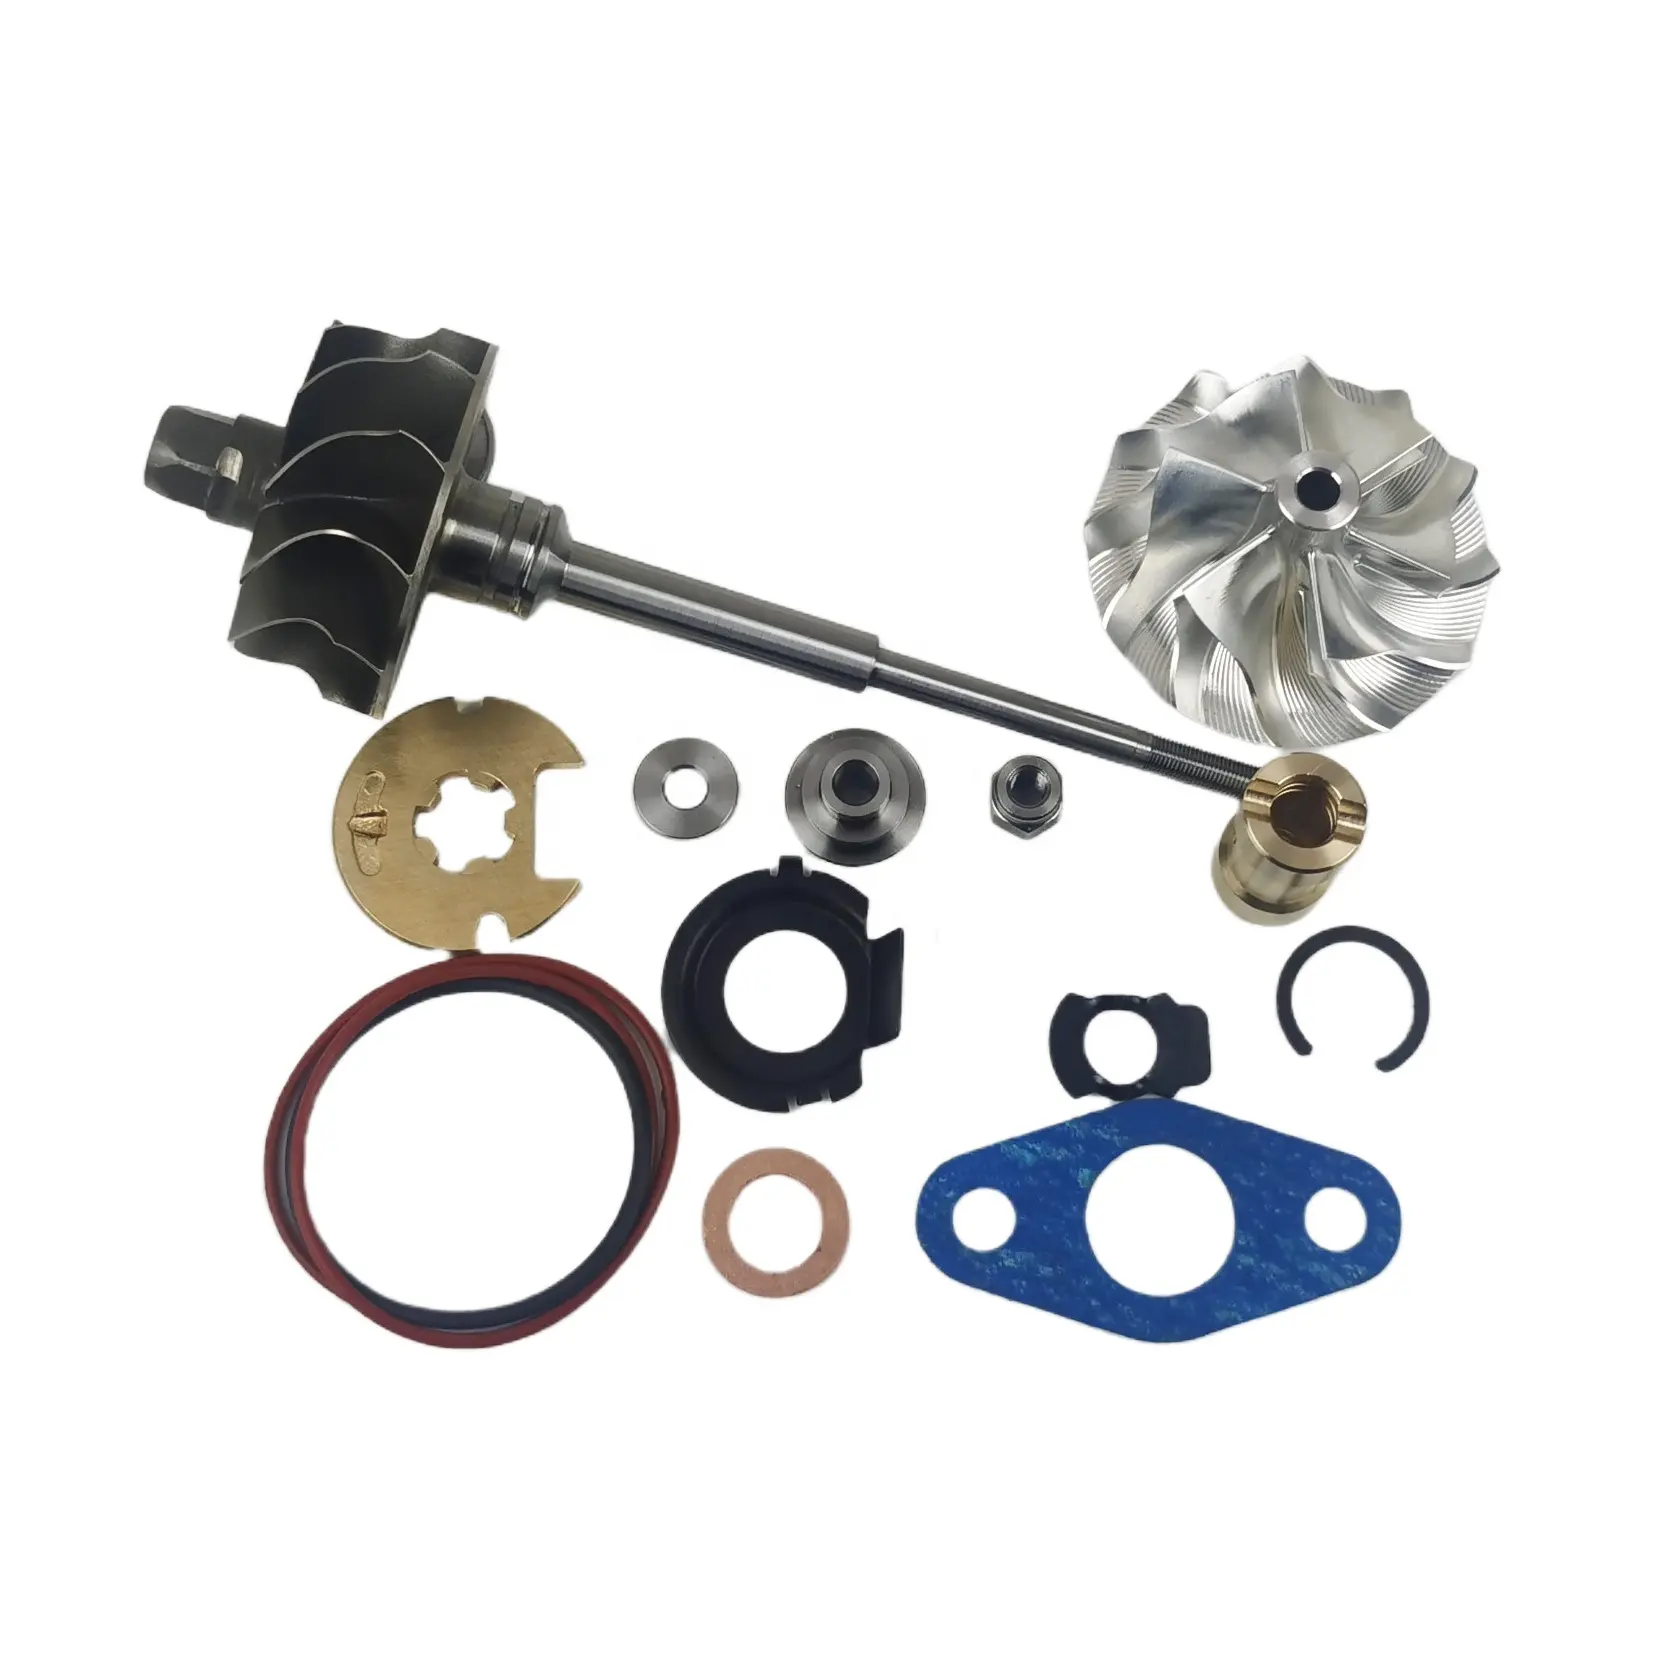 BV43 53039880168 BV43-0168 MFS Turbo shaft and wheel + repair kit for Great Wall Hover H5 2.0L 2.0T 103 Kw GW4D20 1992